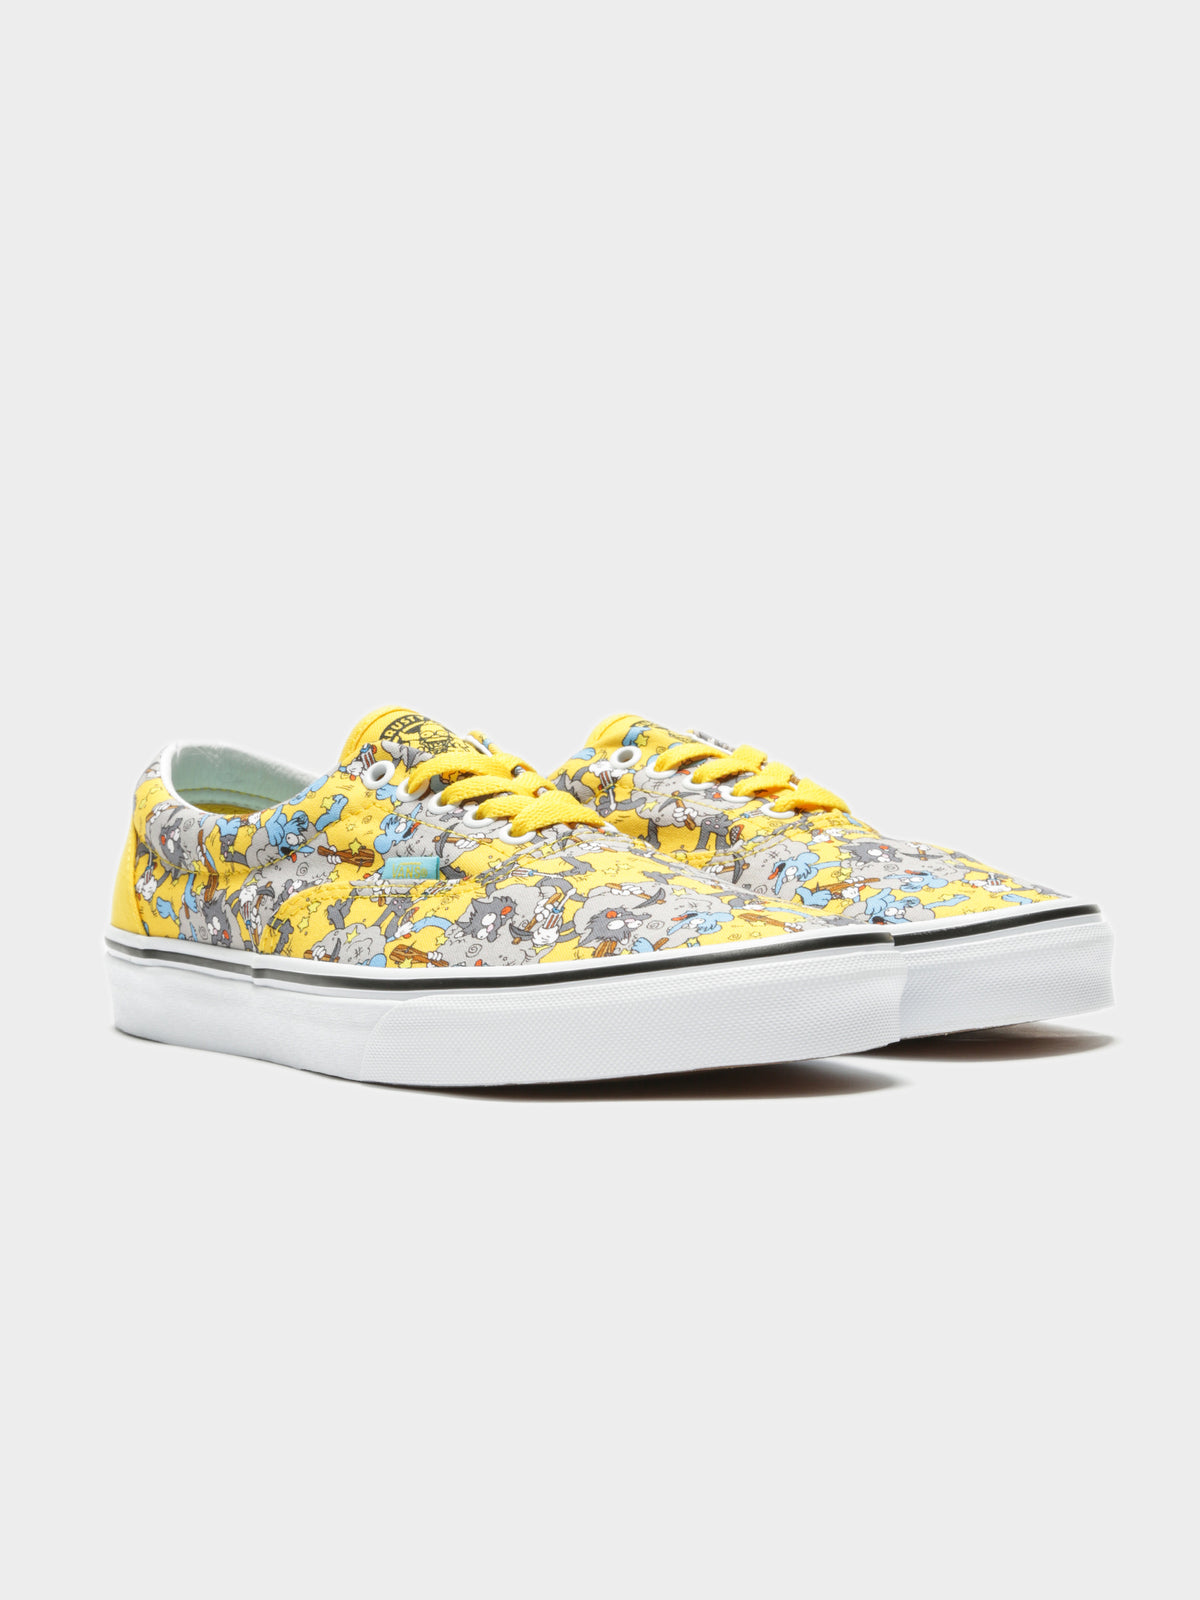 Mens The Simpsons X Vans Itchy &amp; Scratchy Era Sneakers in Yellow